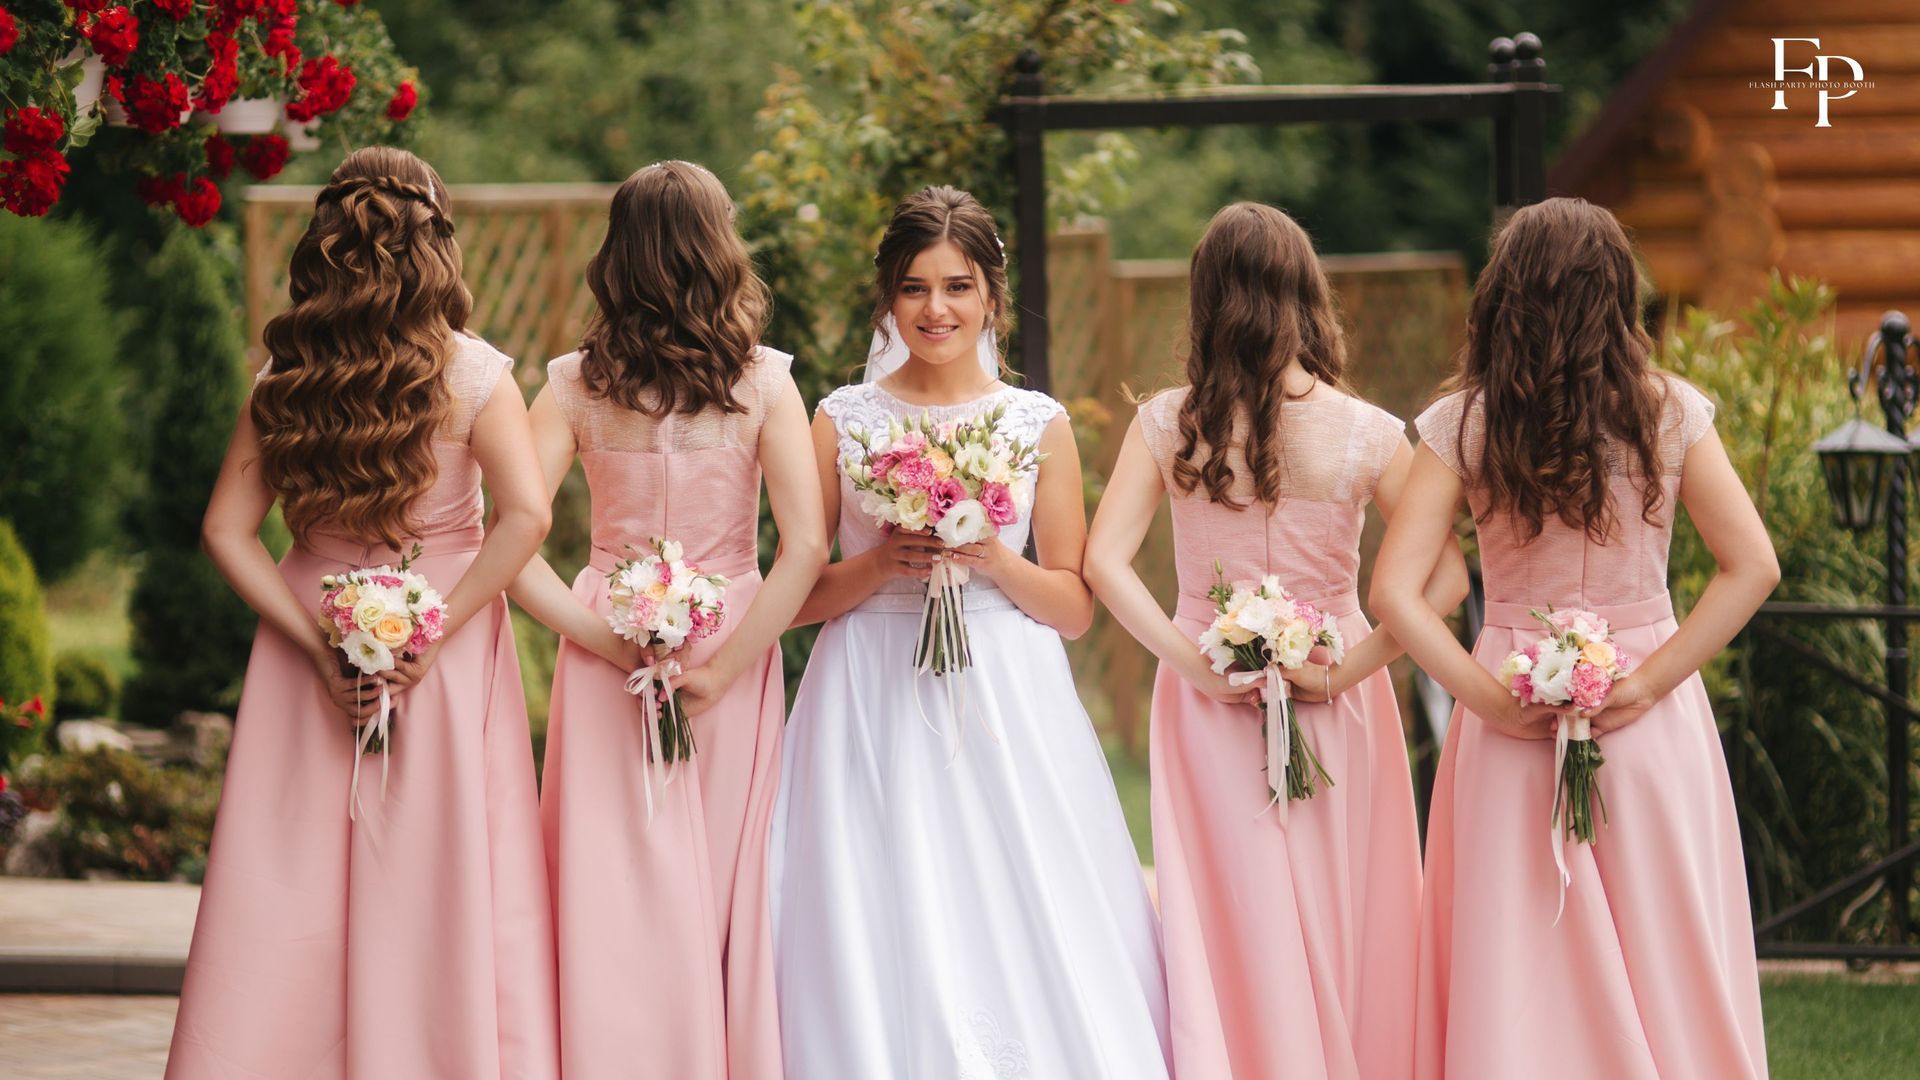 The bride with the bridesmaids holding bouquets at their wedding ceremony in Mansfield